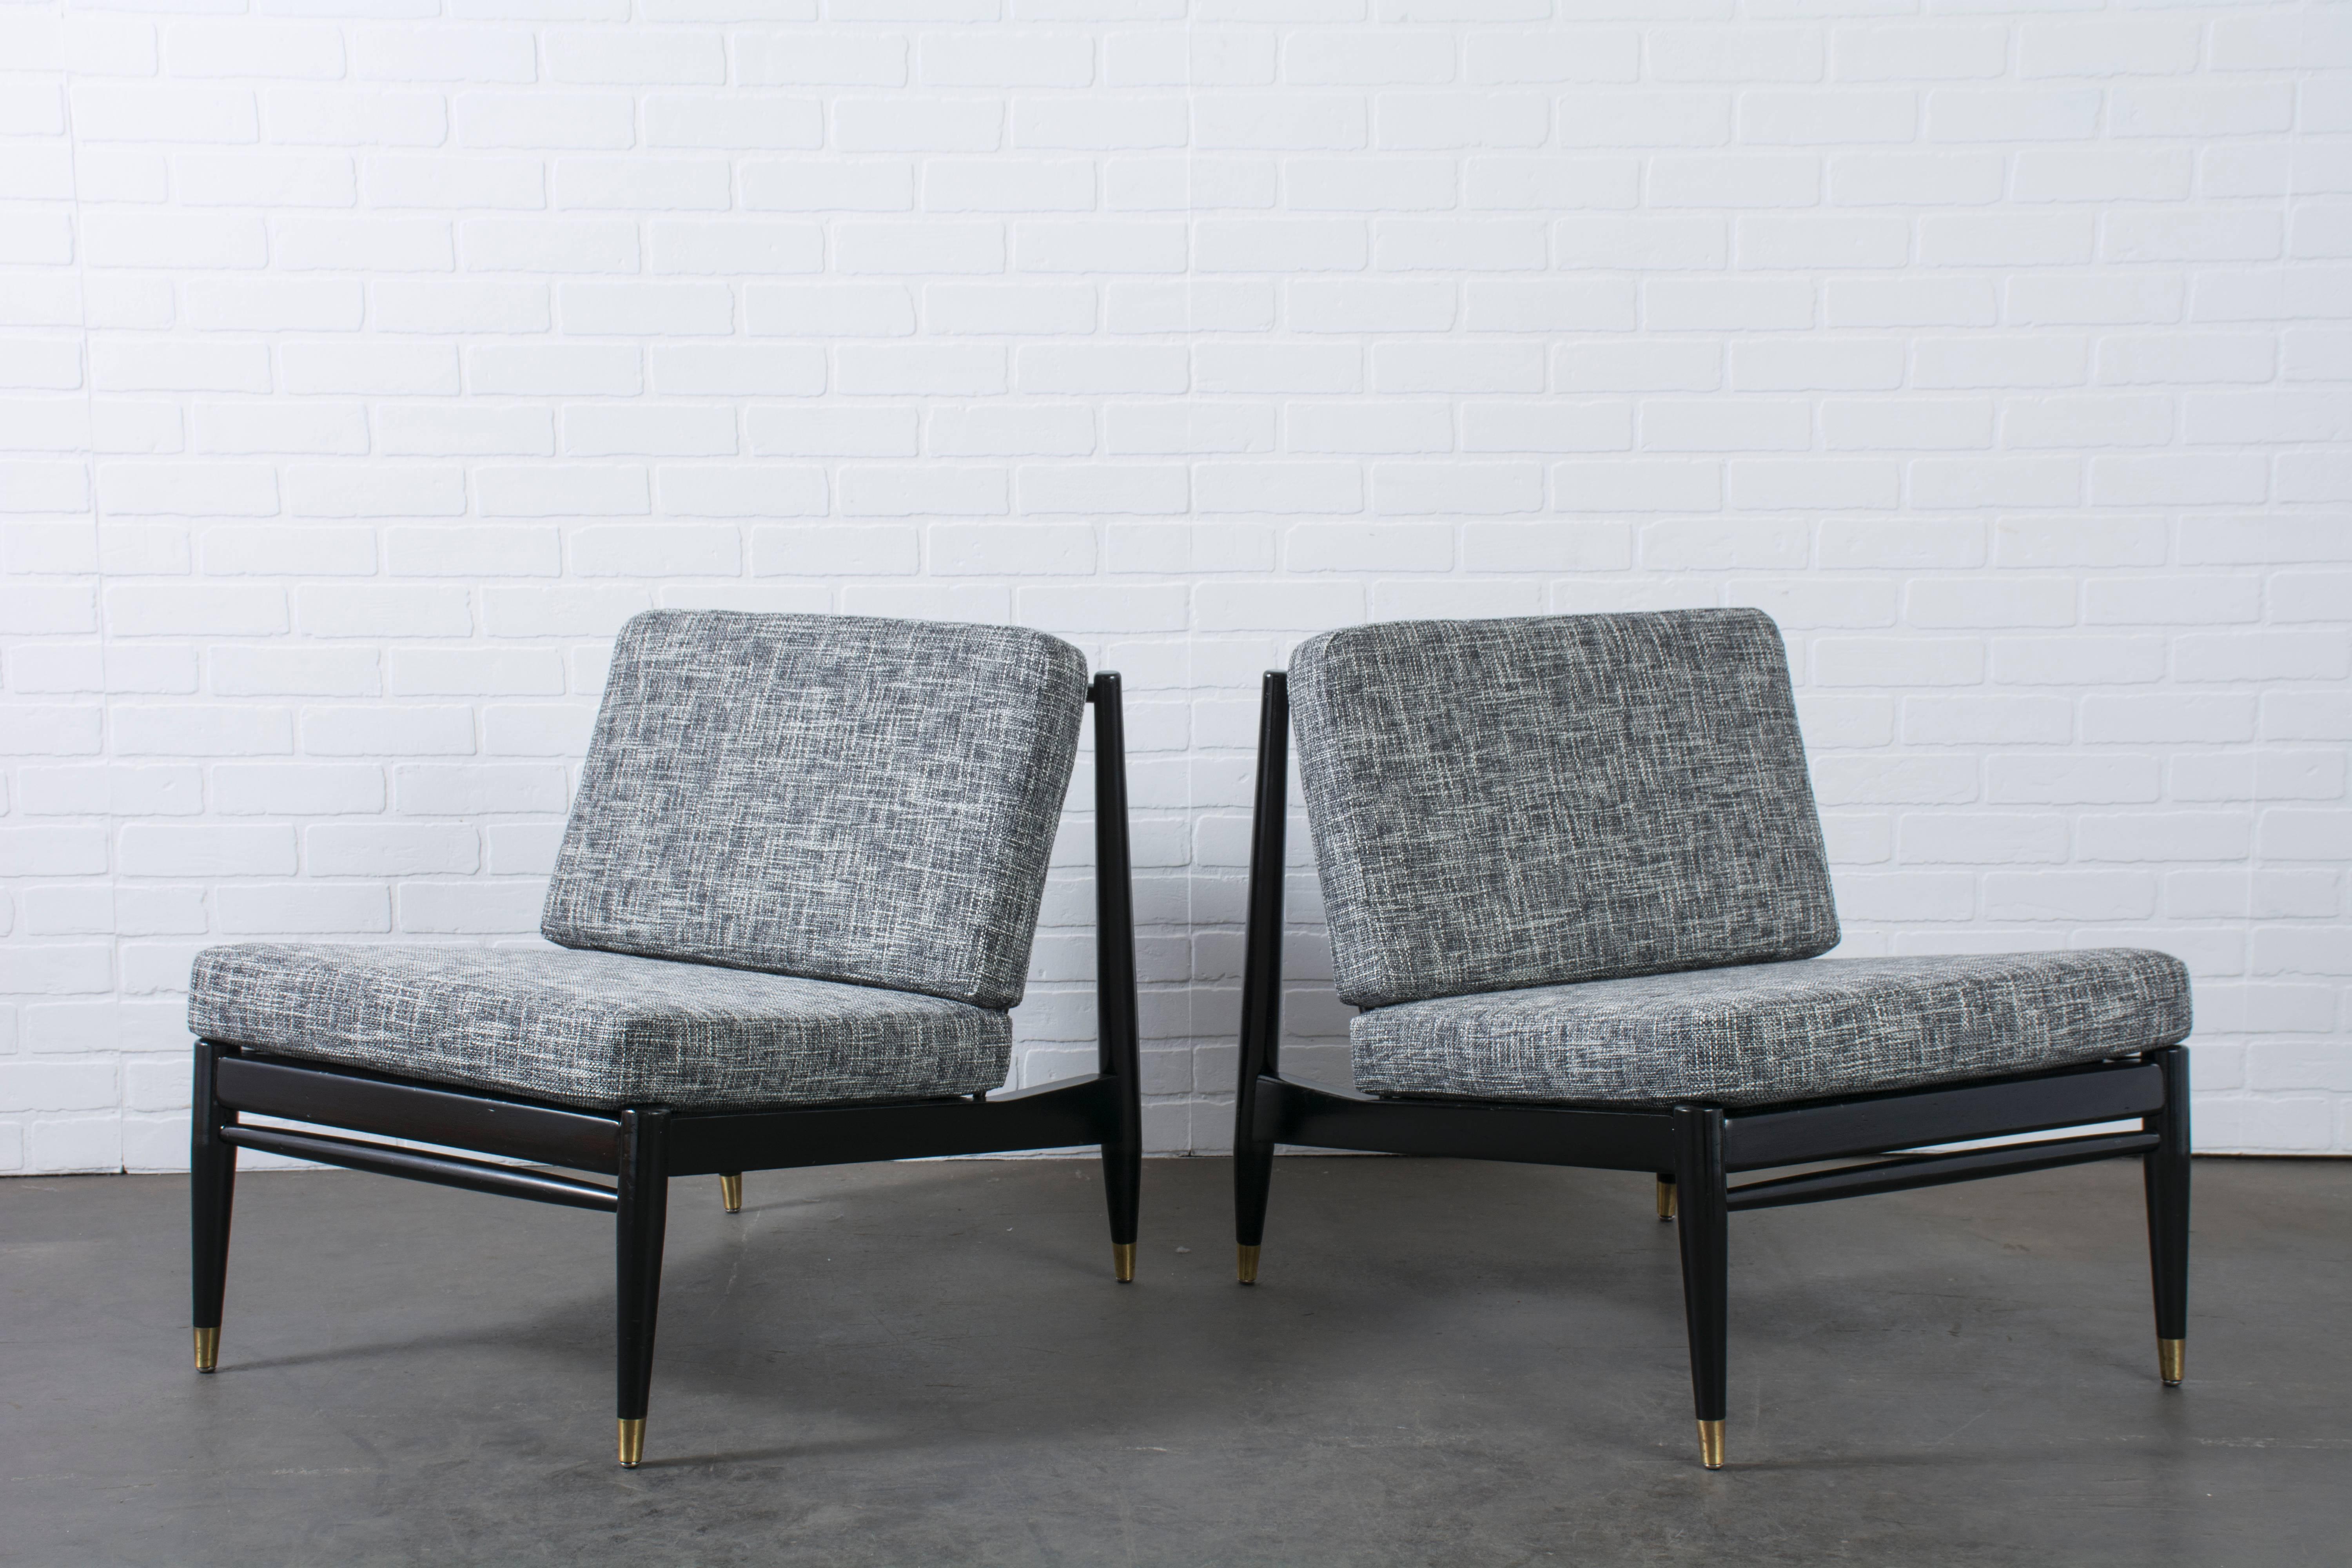 Mid-20th Century Pair of Mid-Century Modern Lounge Chairs For Sale